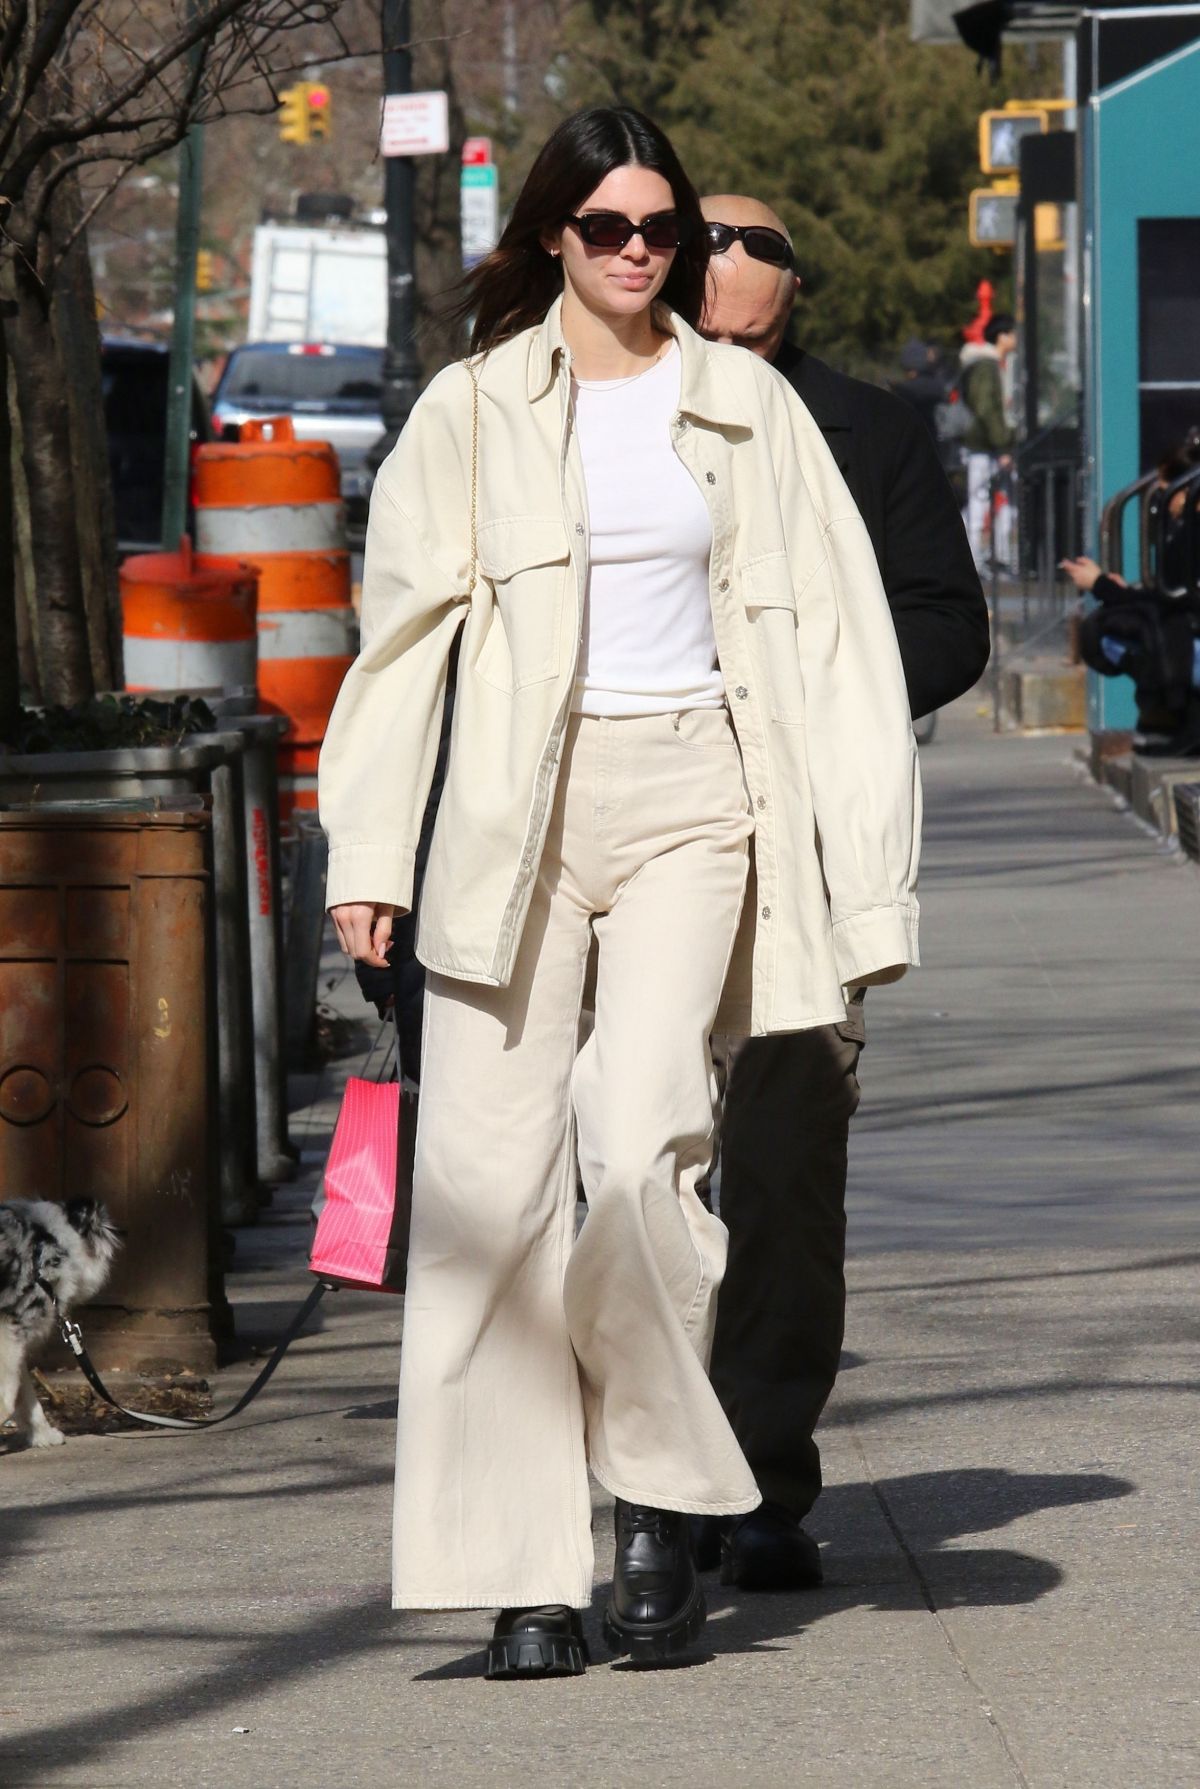 KENDALL JENNER Out and About in New York 02/24/2020 – HawtCelebs